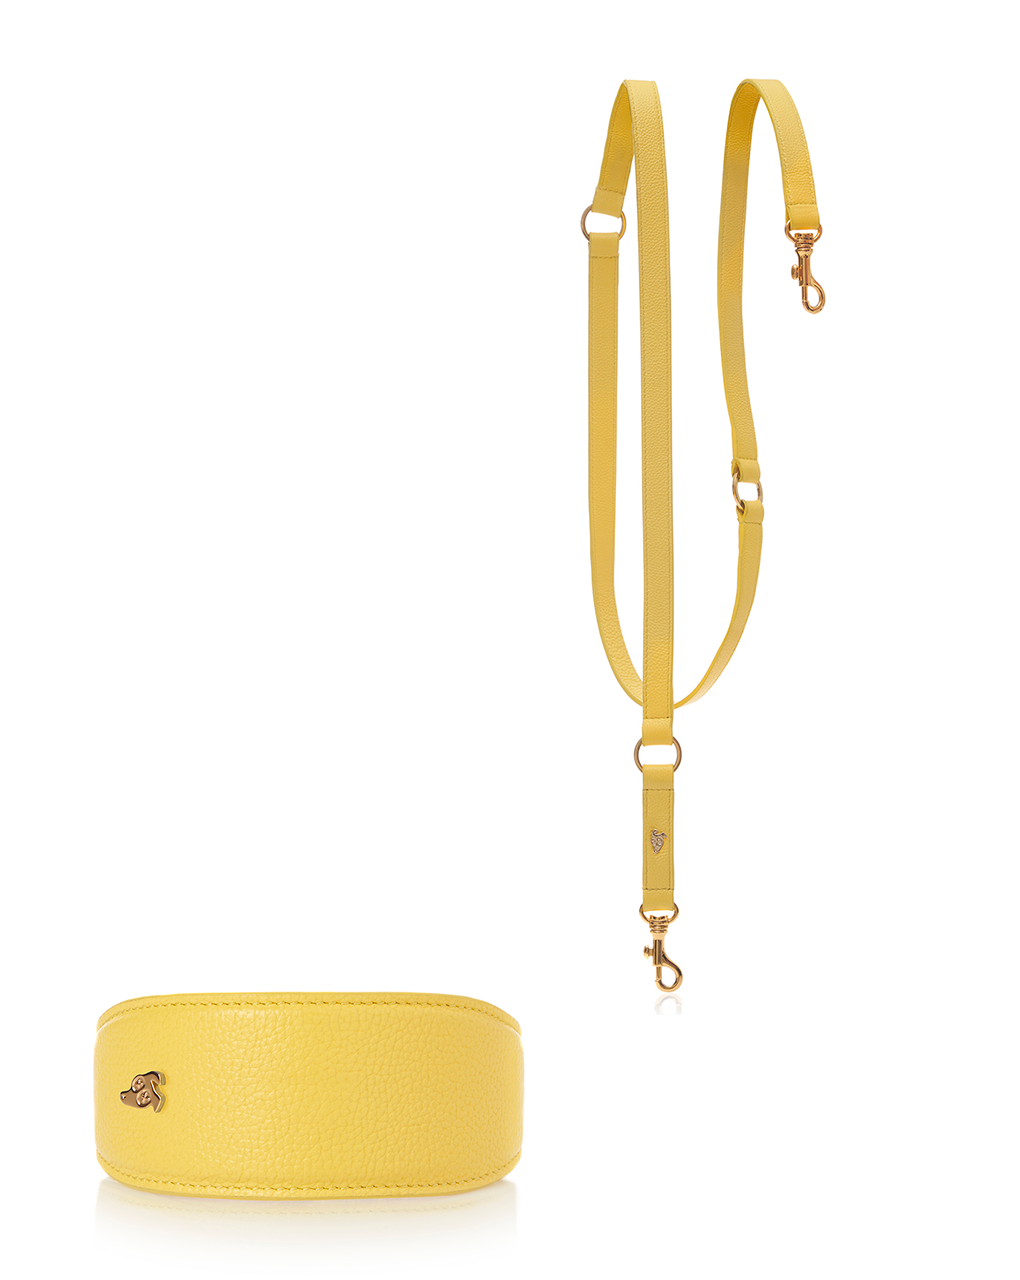 Matching Dog Collar + Leash in Small Grained Leather - Lemon Squeeze